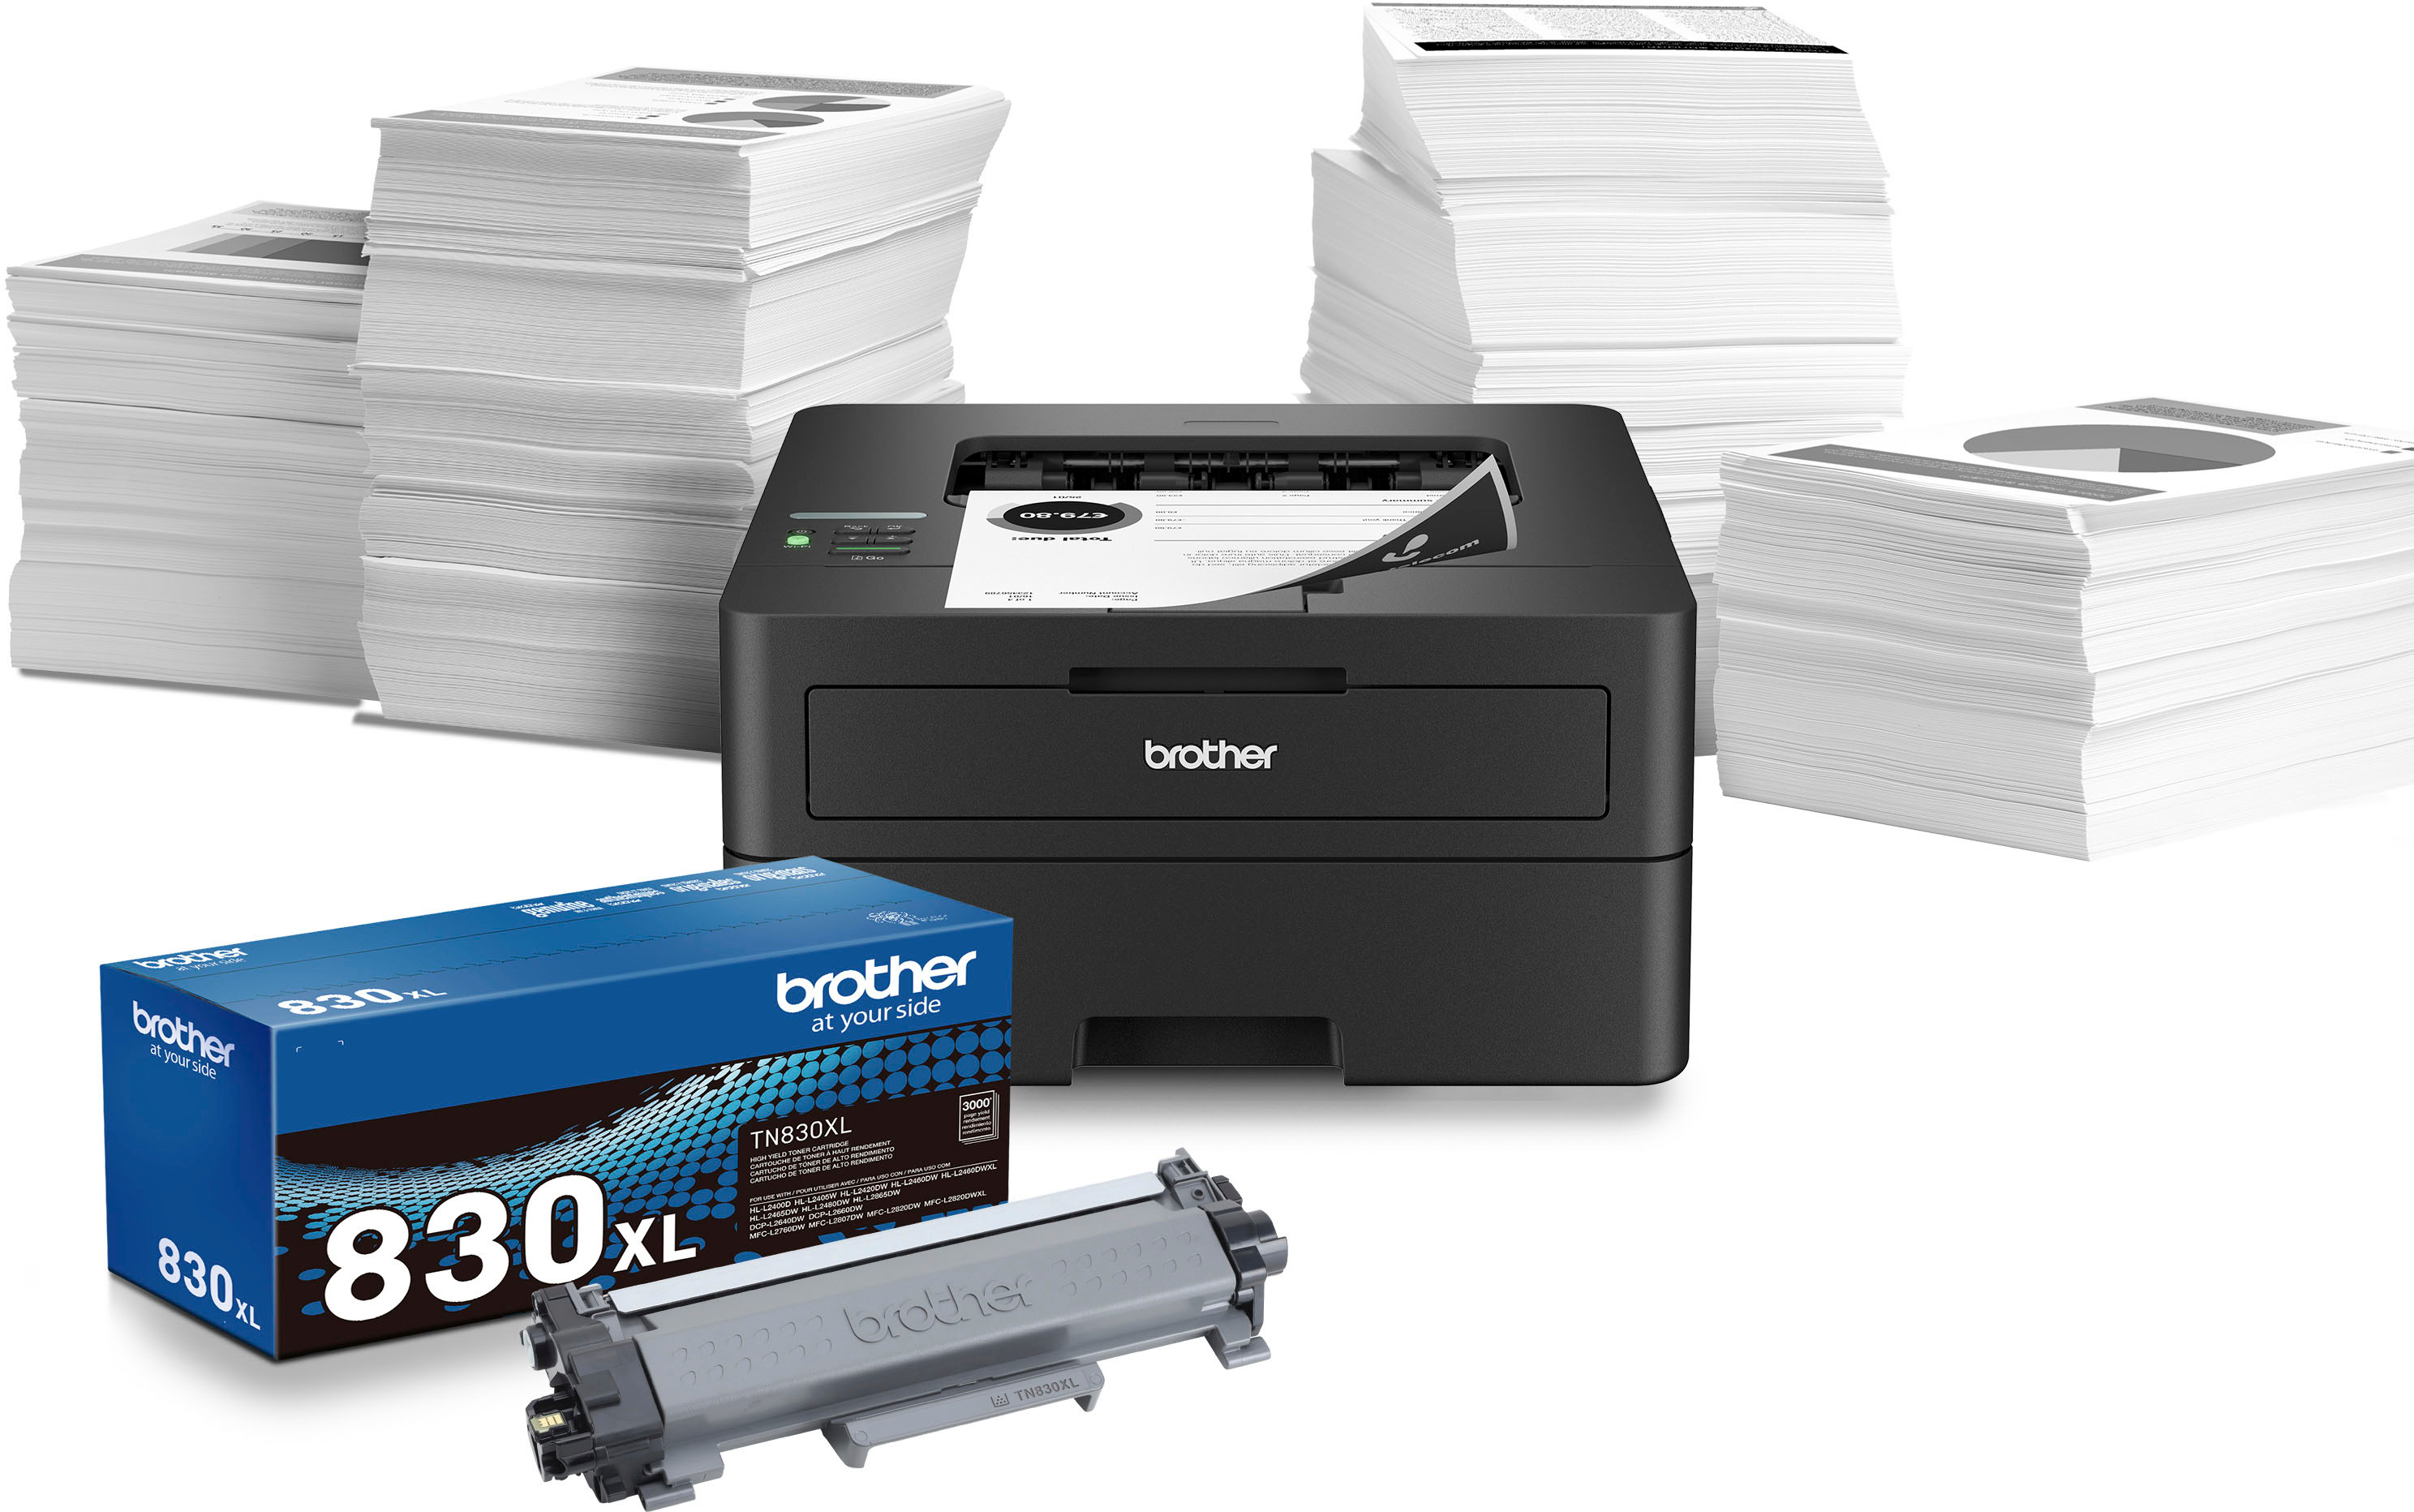 Comparing Brother, HP, and Canon Laser Printers: Who's The Best? -  GadgetMates